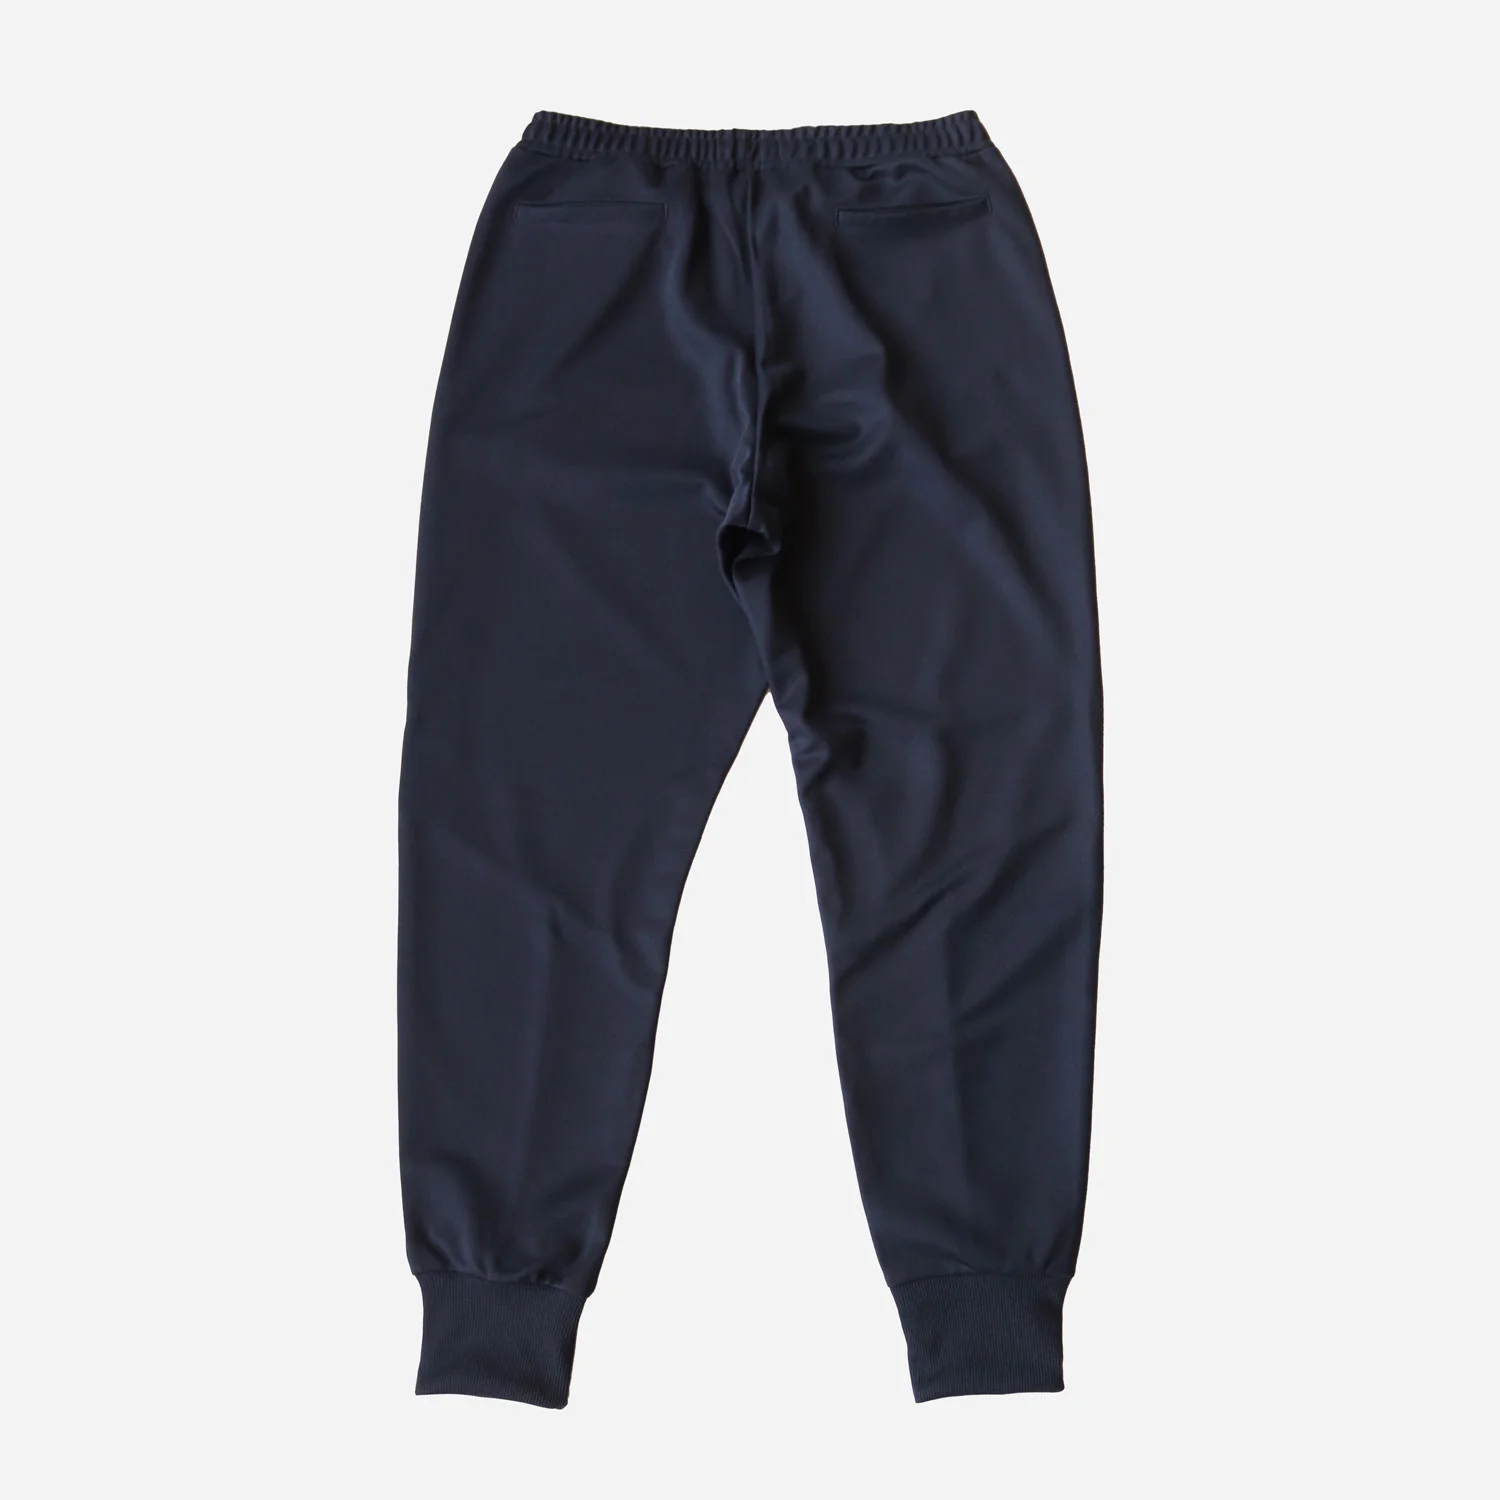 Fred Perry Women's Taped Track Pant - Navy